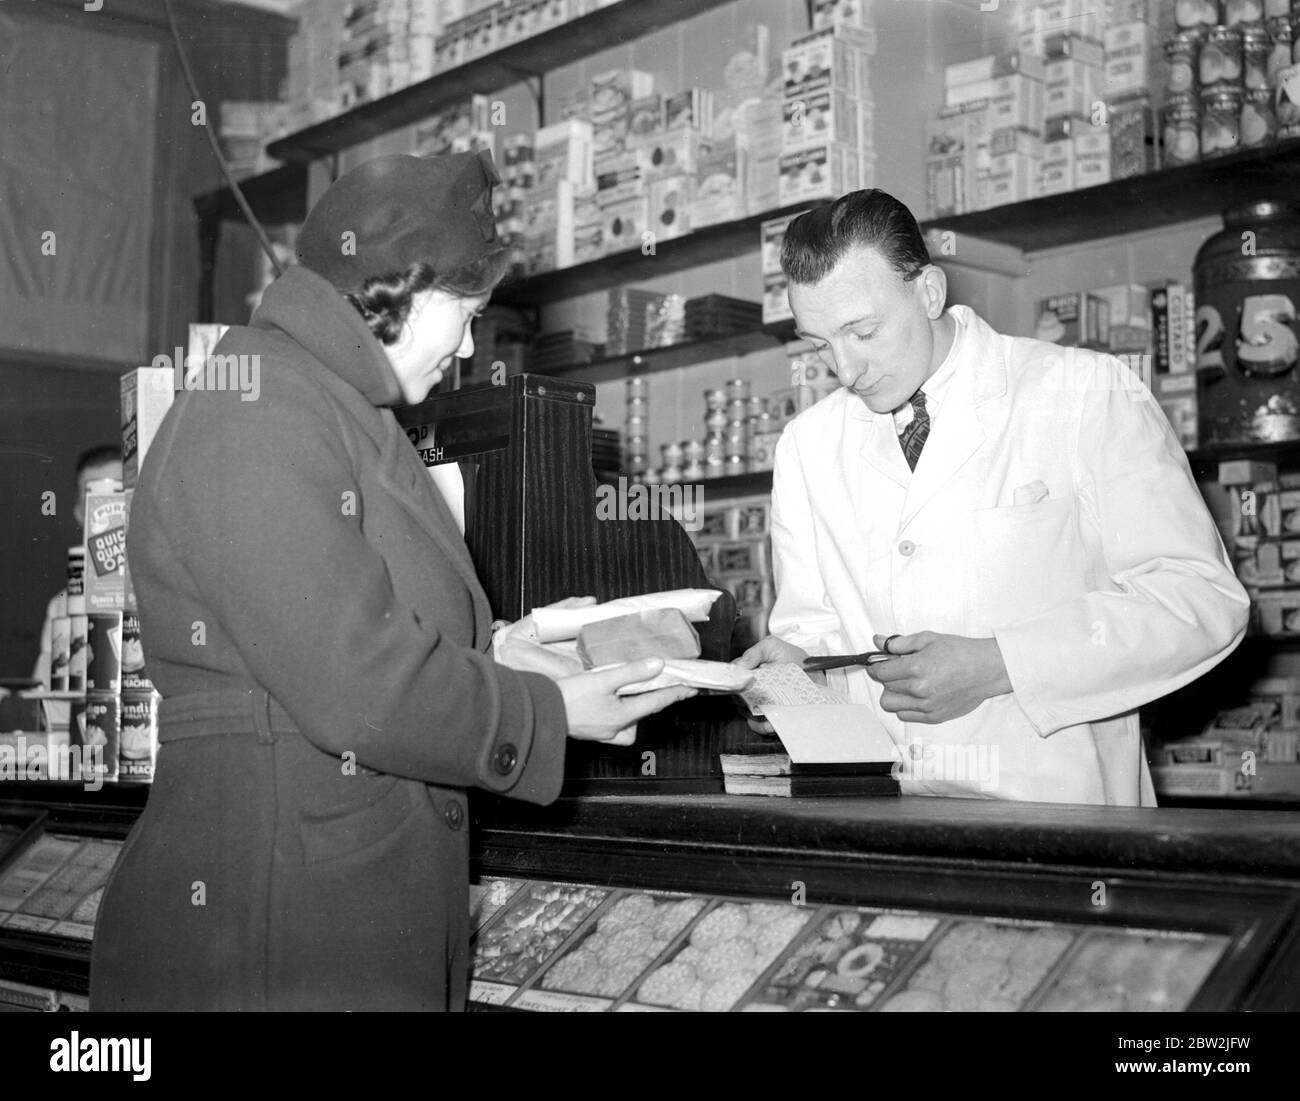 War 1939-1940. Rationing - cutting out the coupons for sugar at the grocer's. 8 January 1940 Stock Photo